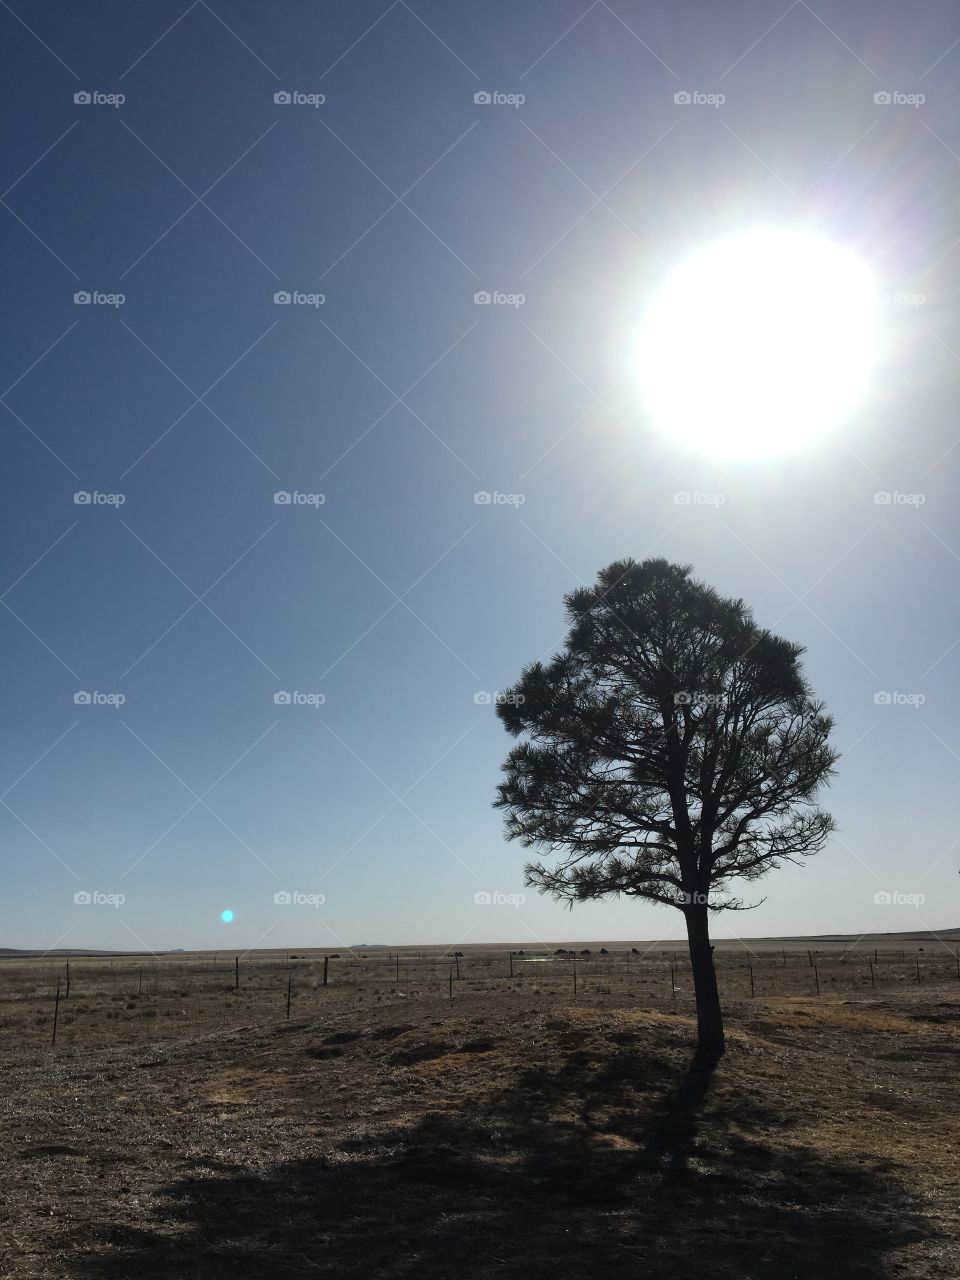 A barren landscape with a solitary tree. A fence behind it, some cattle far off in the distance. The tree stands alone on a small mound. The sun shines down brightly on the landscape.